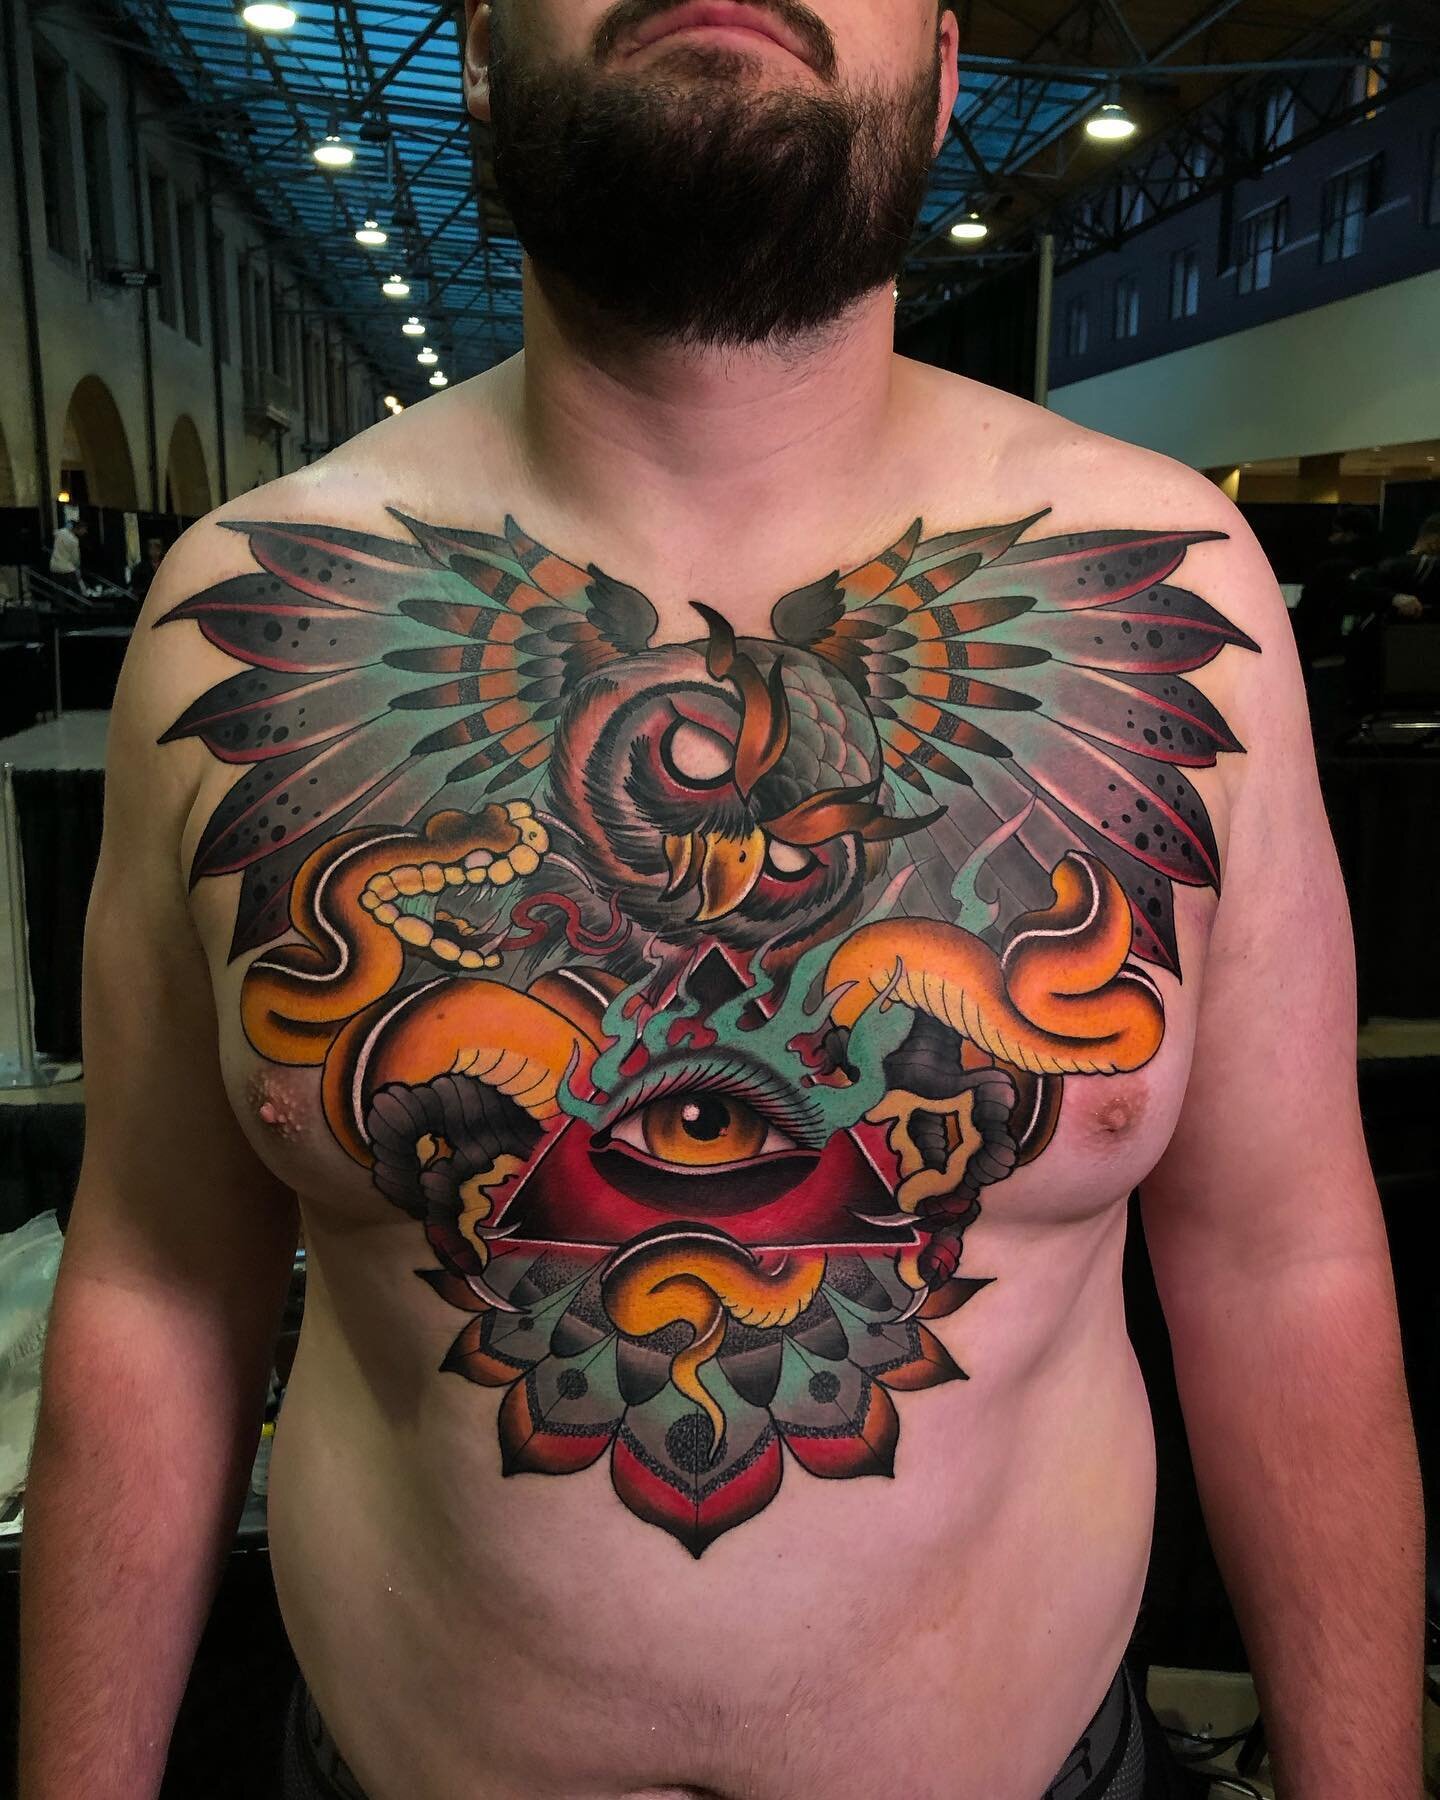 Drew is tougher than a two dollar steak and got this chest piece done in about 15 hours over three straight days in St. Louis @tattoothelou 🎉This convention was such a blast. I had way too much fun and made so many new friends! Big thanks to @ltwood